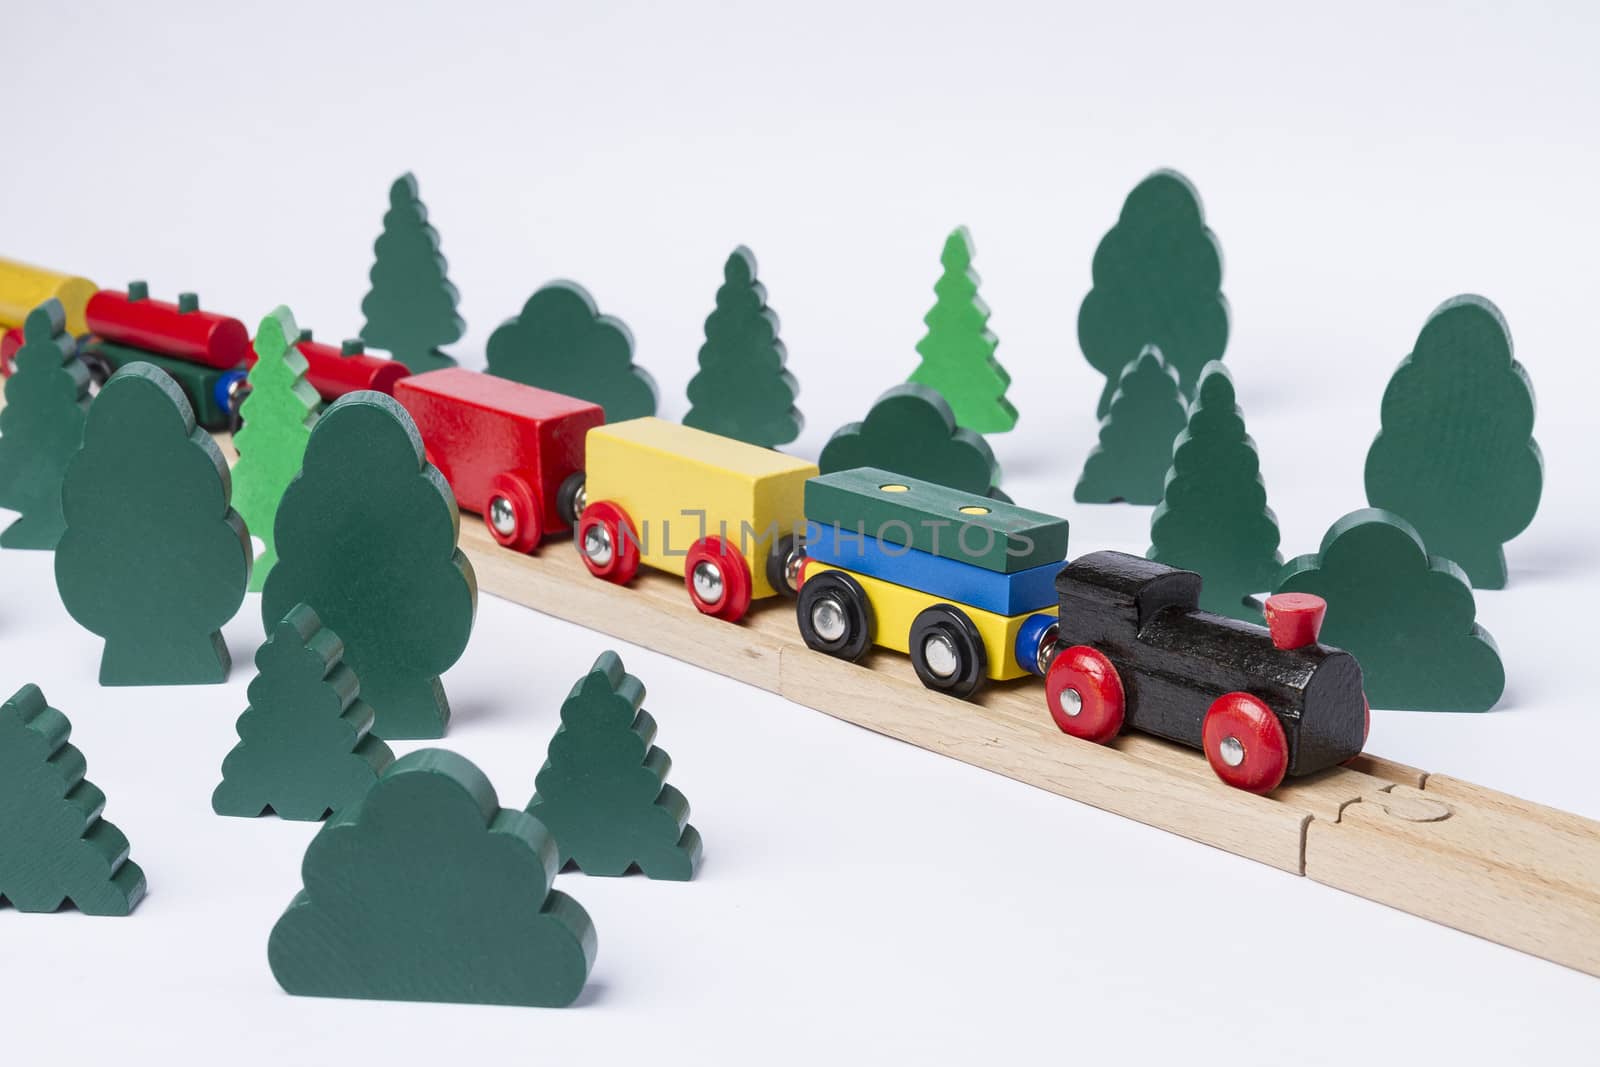 fast train driving through small forest. scenery made of wooden toy